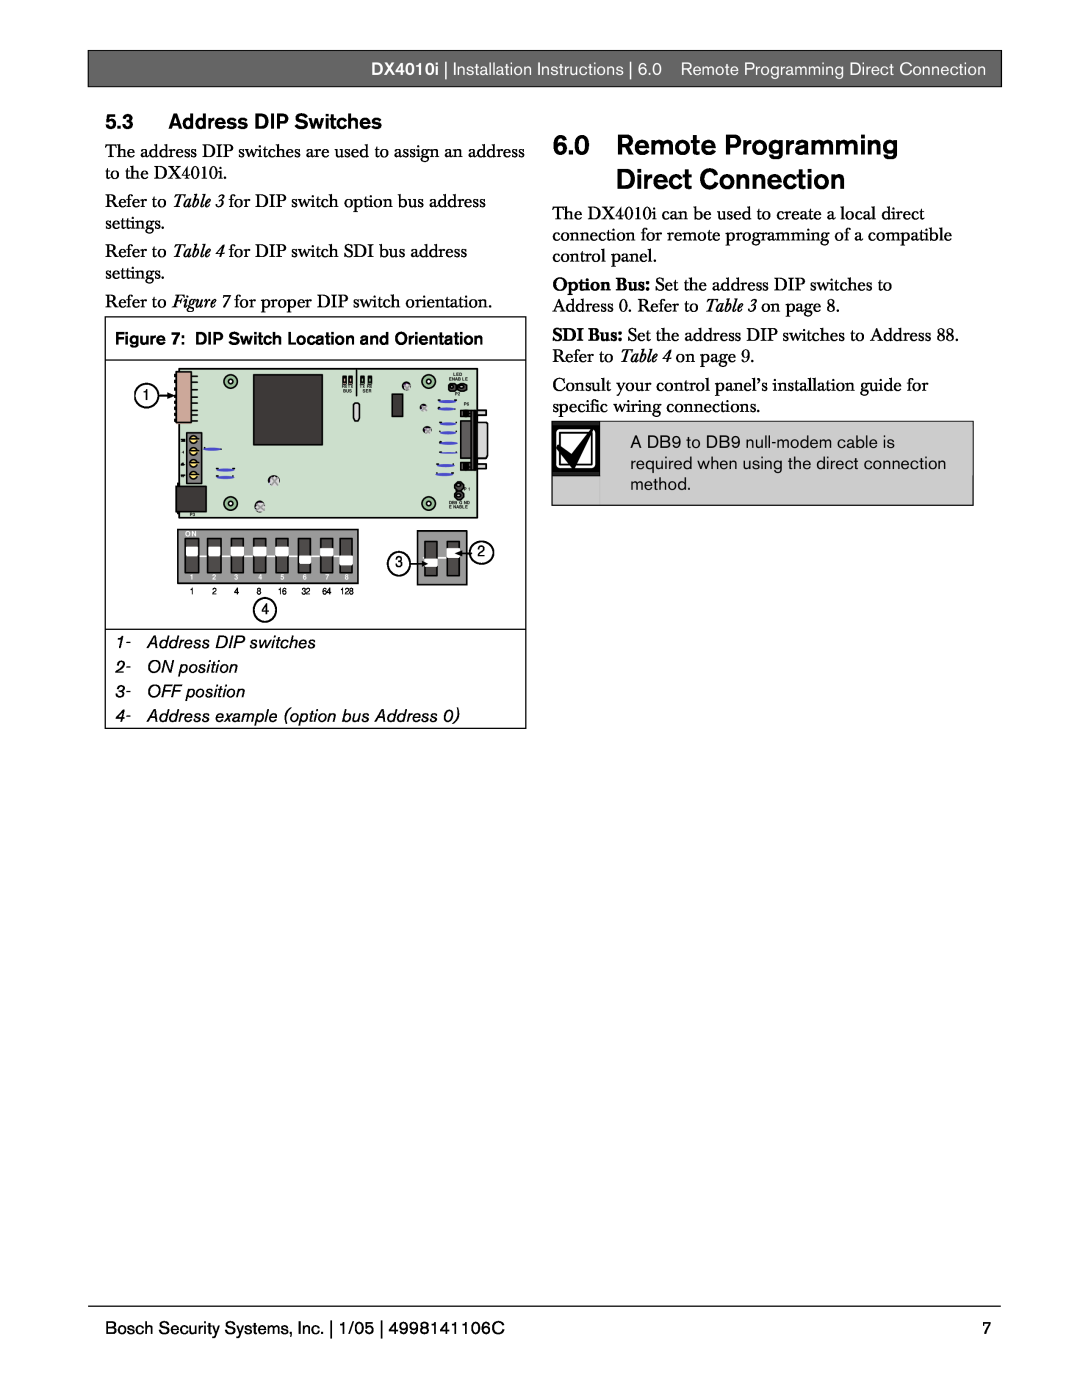 Bosch Appliances DX4010I Remote Programming Direct Connection, 5.3Address DIP Switches, OFF position 